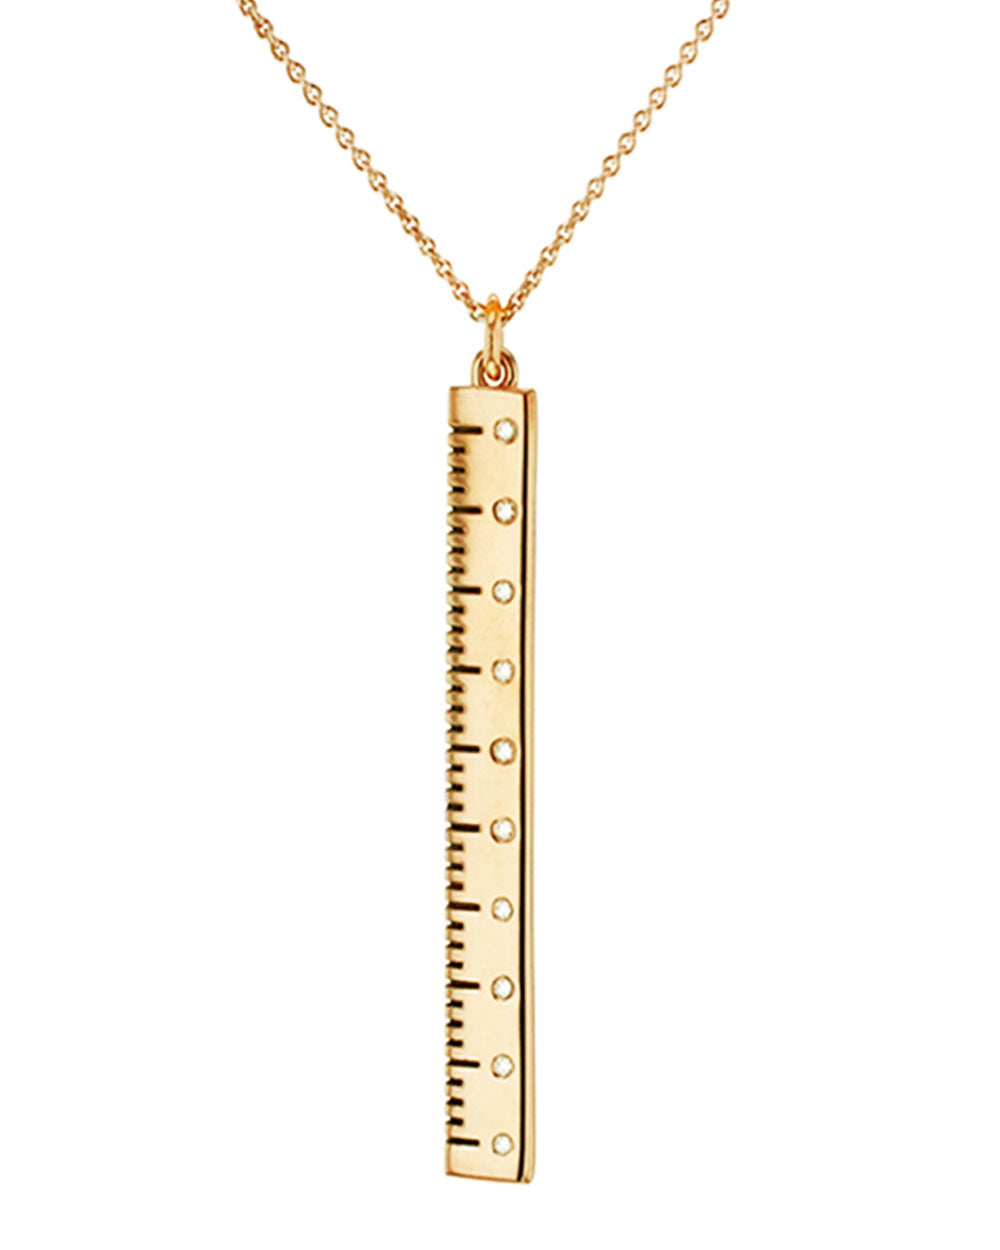 Gold Vermeil and Sterling Silver Break the Rules Ruler Necklace